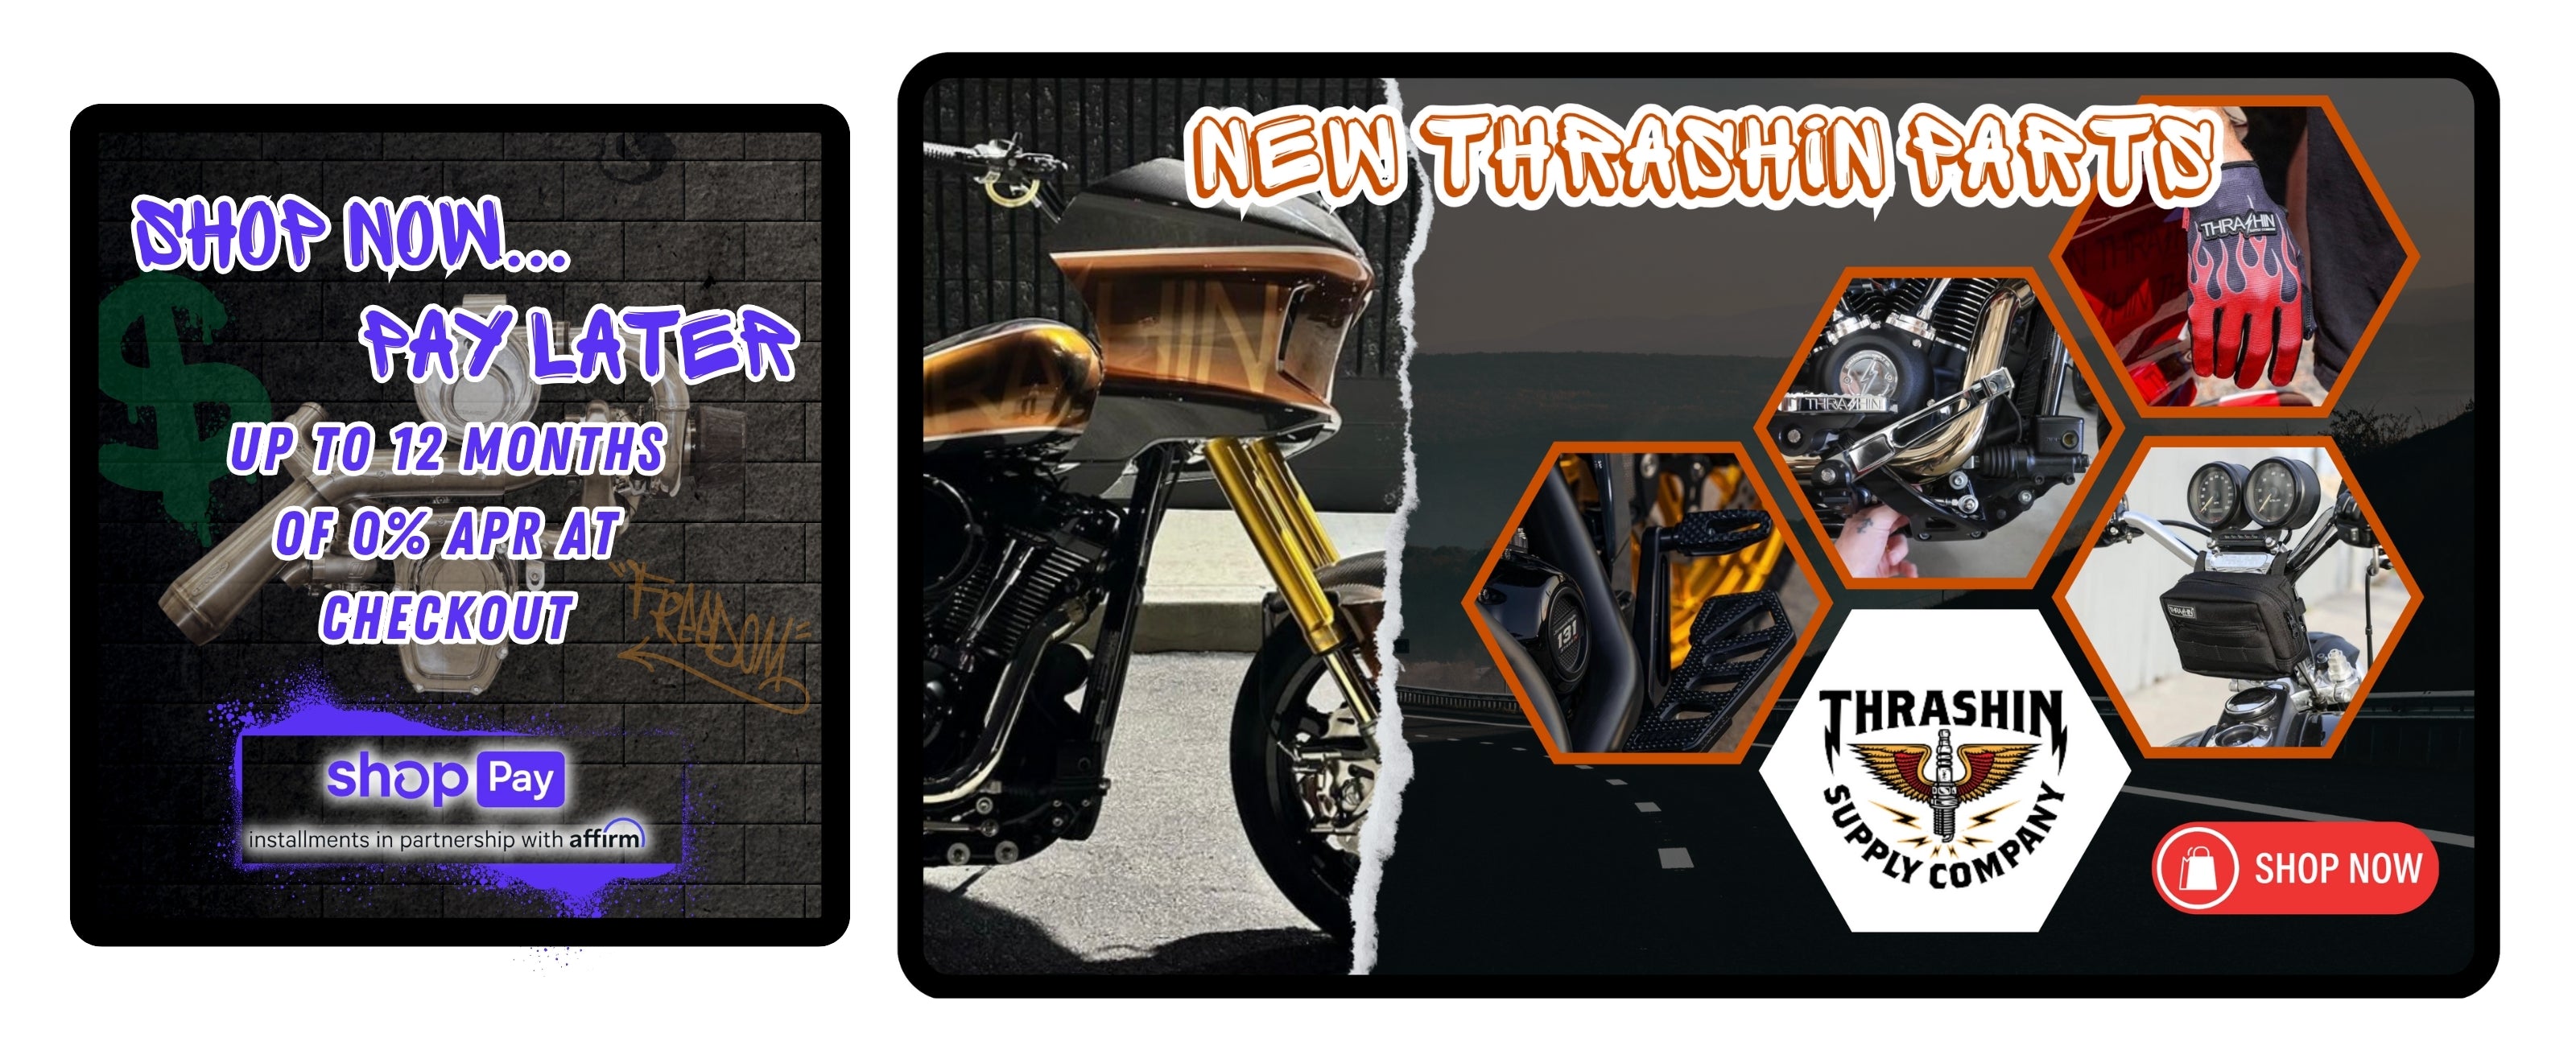 Thrashin Supply website banner showcasing a custom motorcycle built by Thrashin Supply, with a "Shop Now" button and an announcement for Shop Pay financing options available